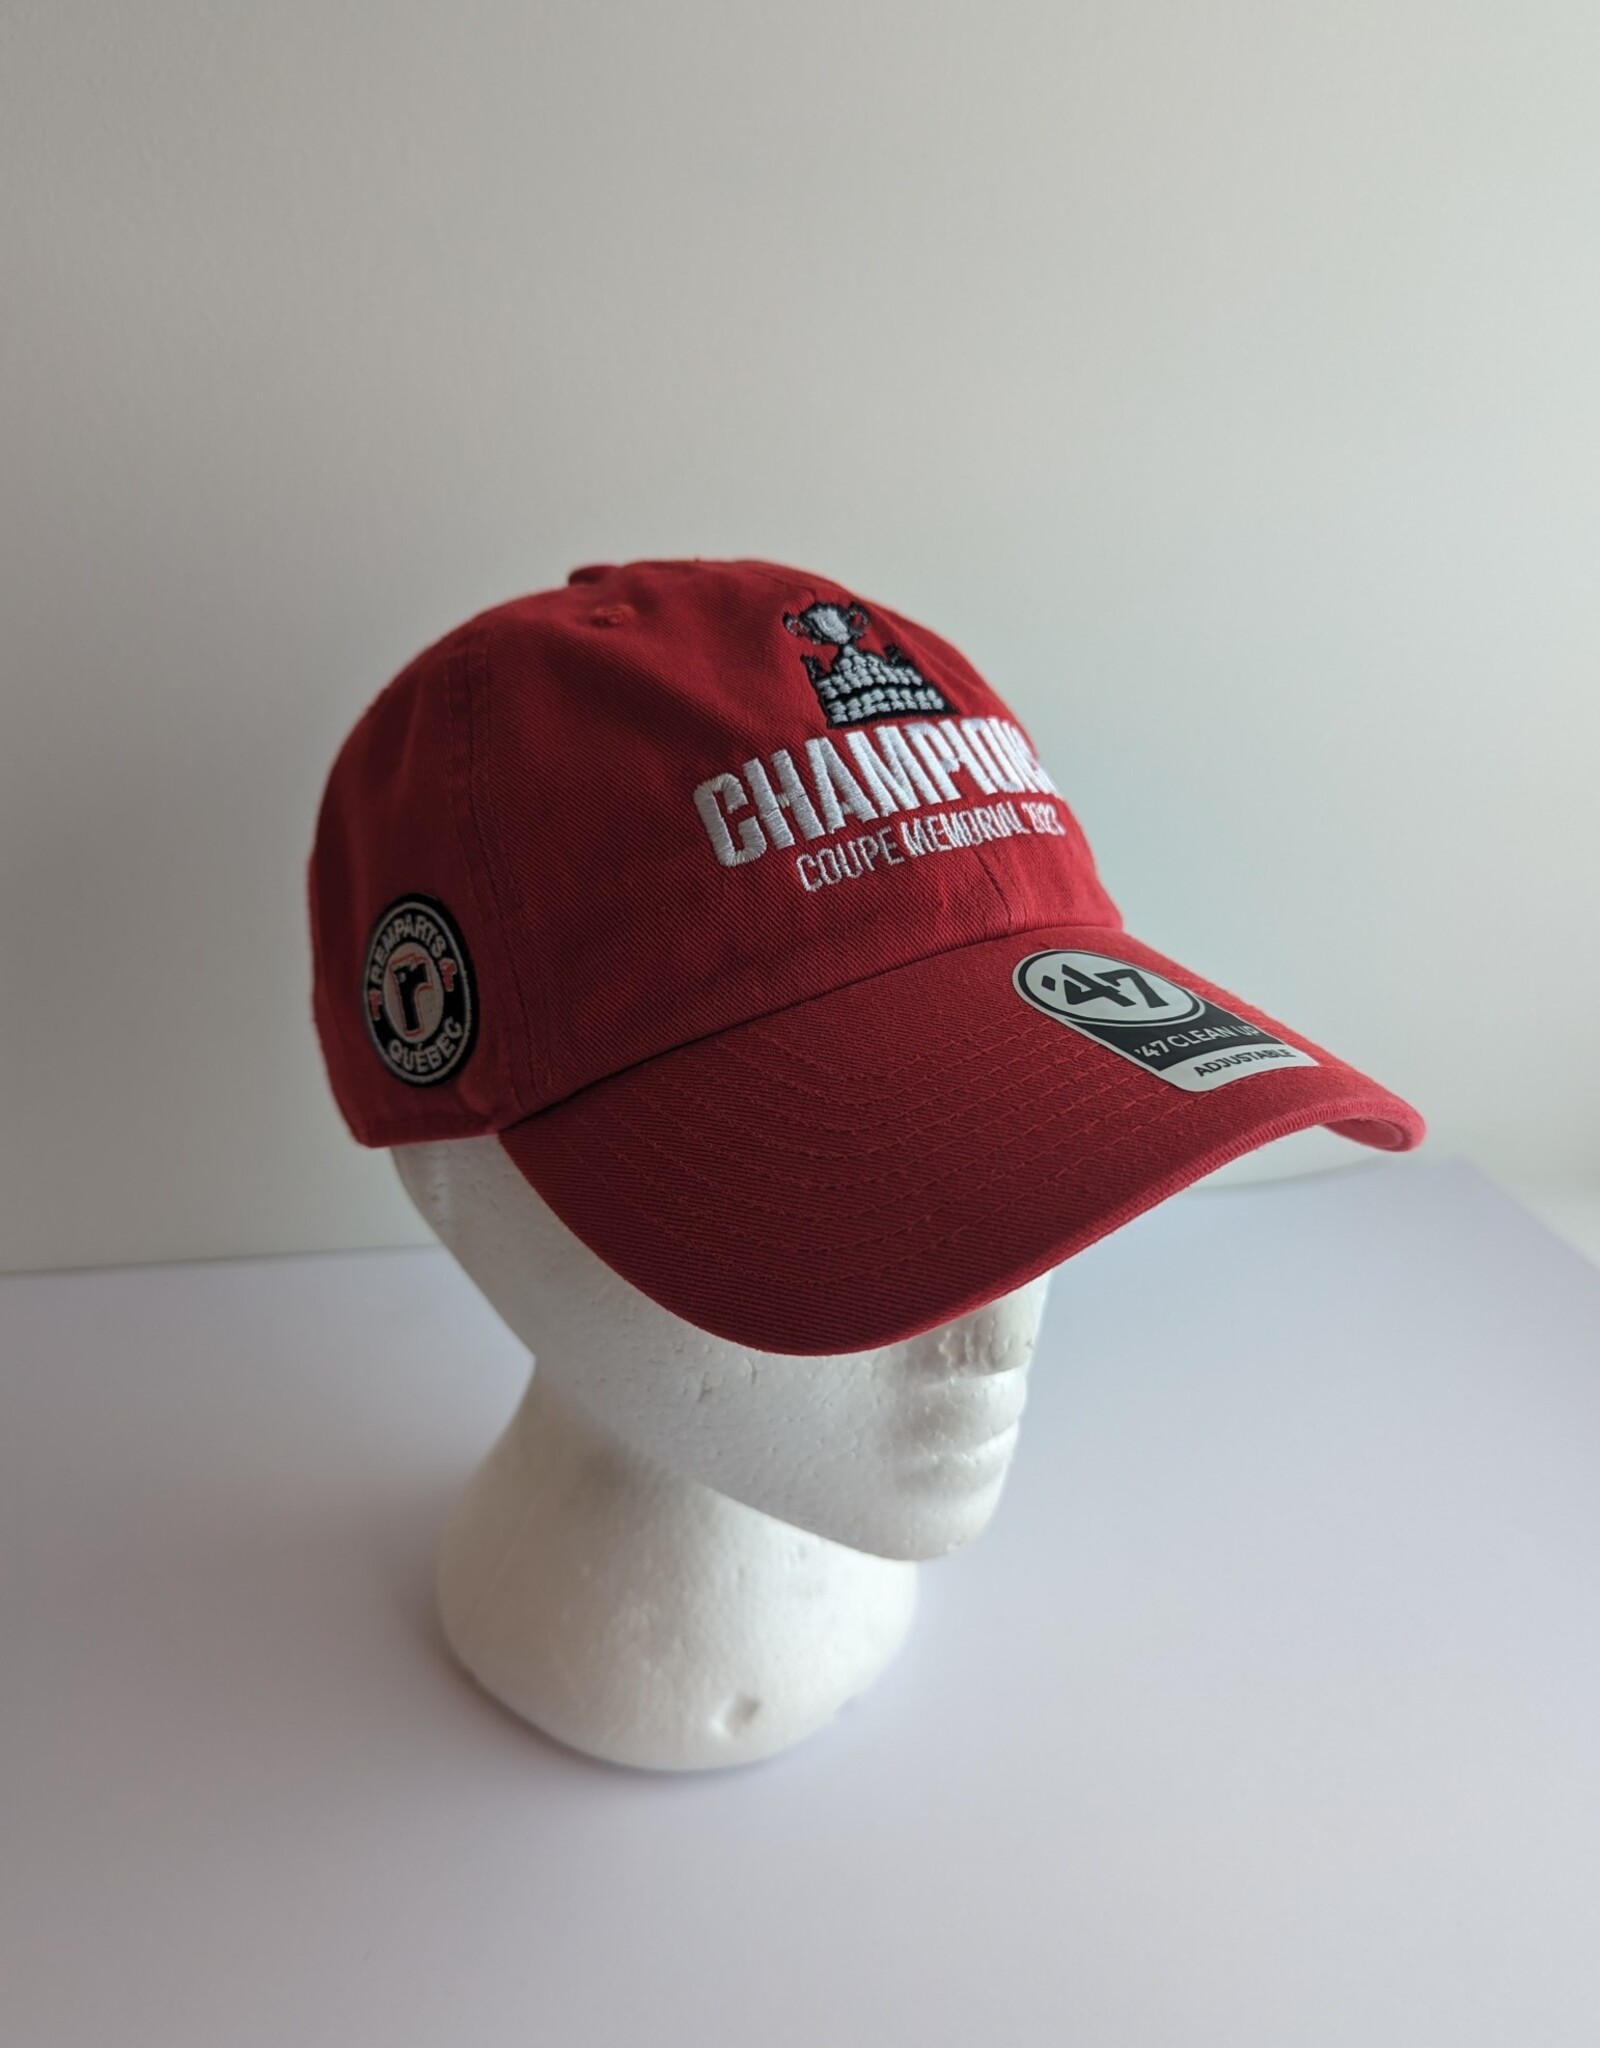 Casquette 47' Rouge Chino Champions Coupe Memorial